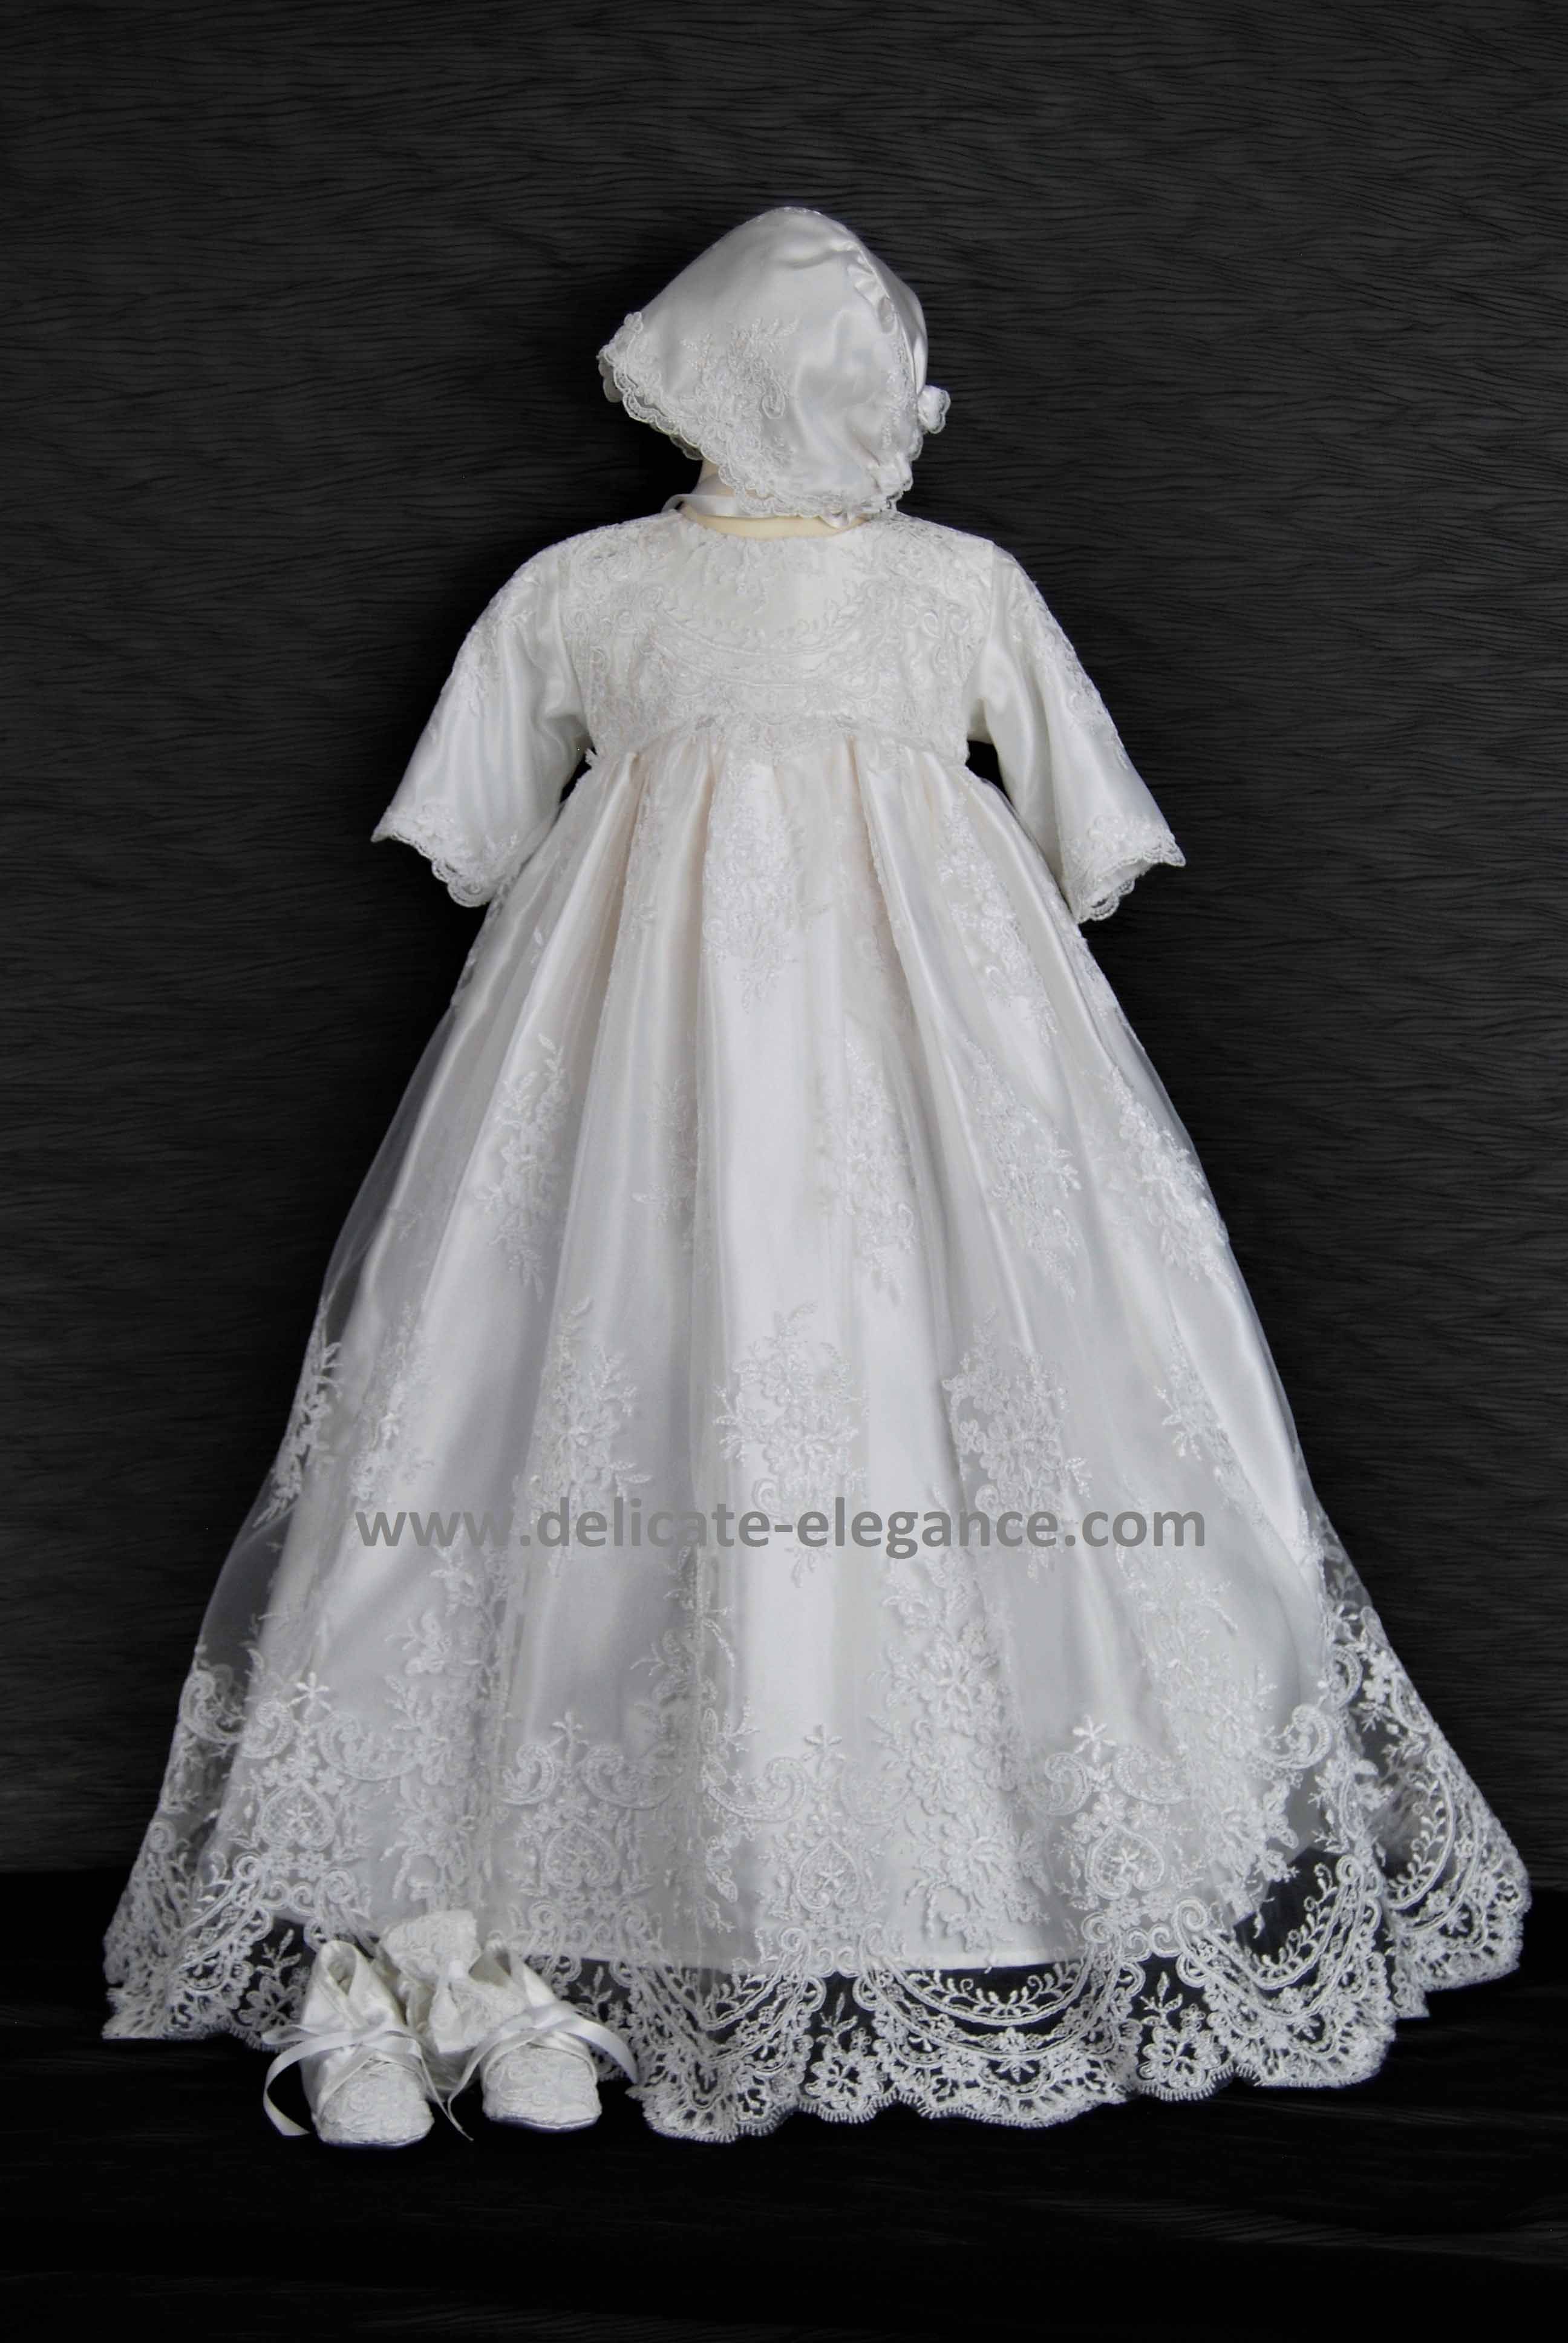 4260 (White Lace): Girls' Satin Christening Gown - Delicate Elegance